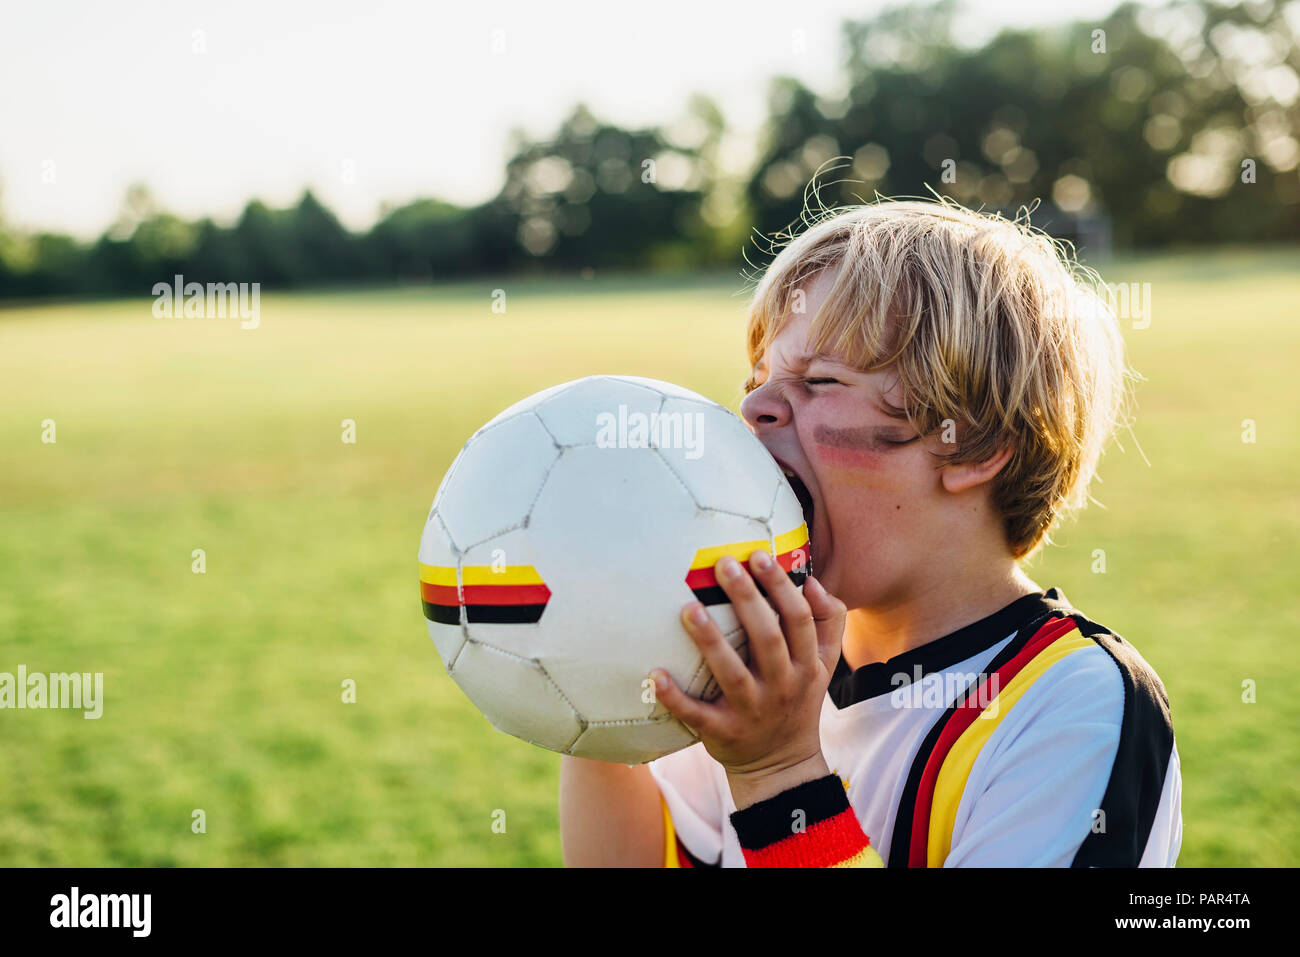 Boy with face paint and German football shirt, biting soccer ball Stock Photo